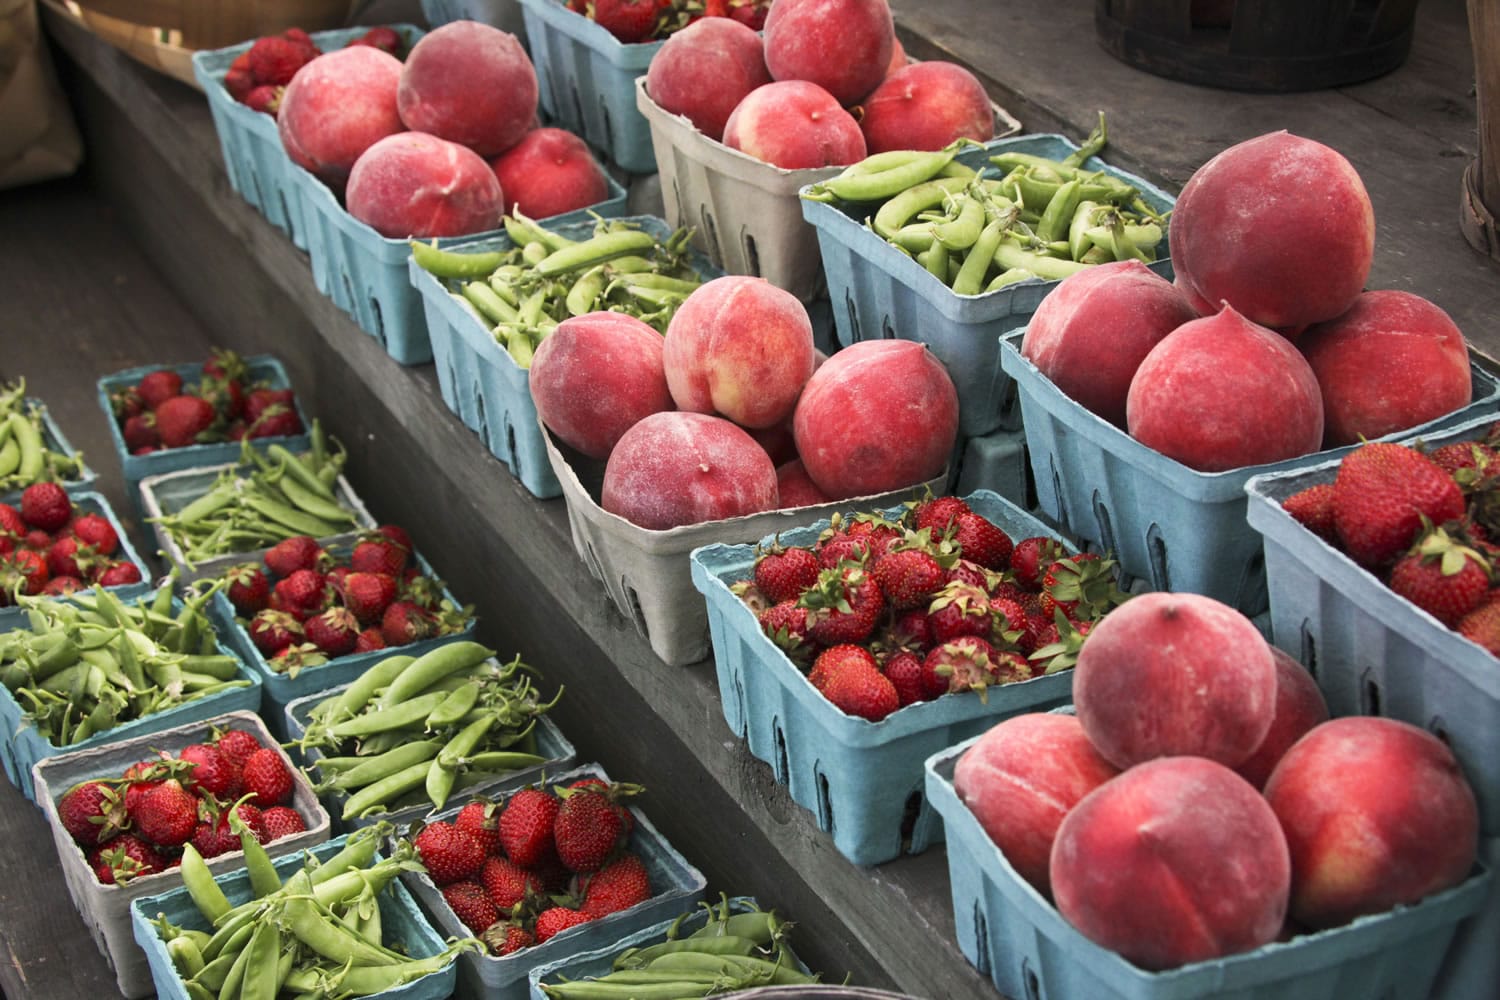 Peaches, strawberries, and snap peas are for sale at a roadside market outside Gettysburg, Pa., in June 2013. Pregnant women, mothers and children who get federal assistance with their grocery bills will now be able to buy more whole-grain foods, yogurt, fish, fruits and vegetables.